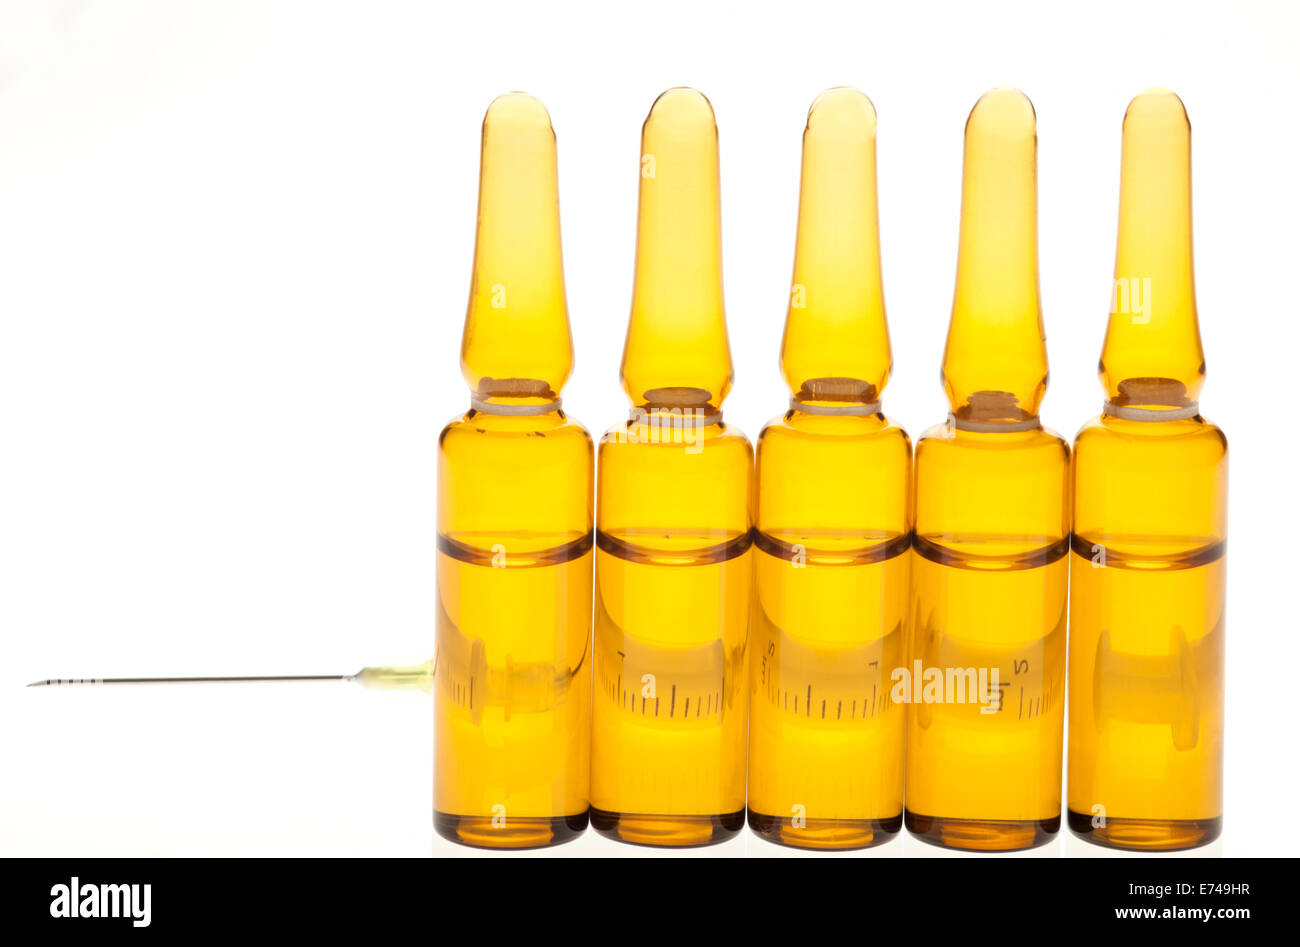 Ampoules and Syringe on a white background Stock Photo